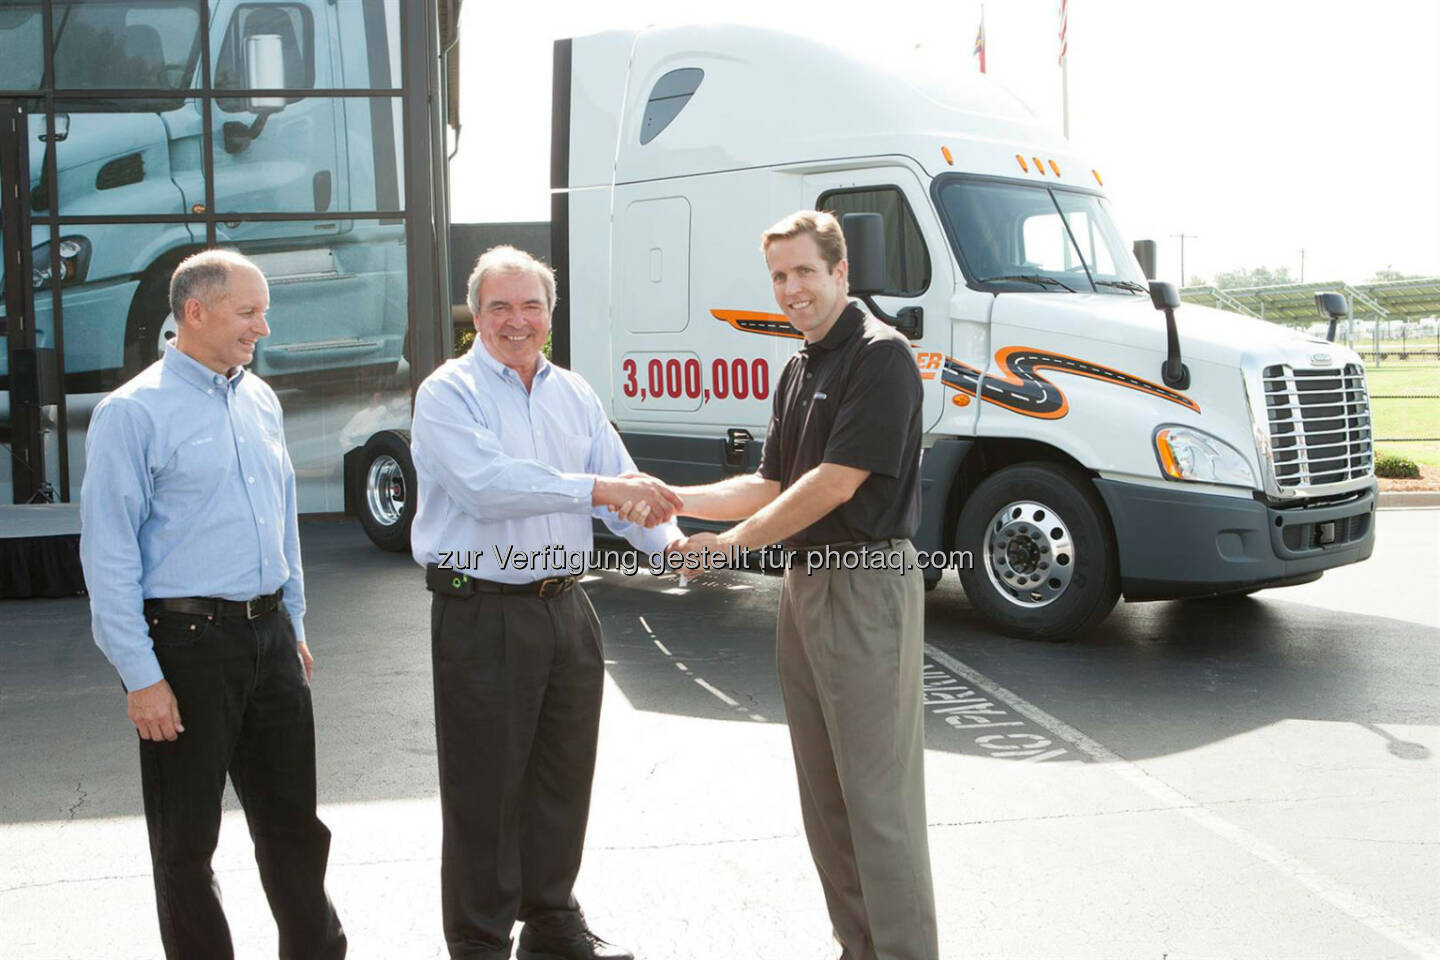 Daimler makes three-millionth Commercial Vehicle in North America: Roger Nielsen, Chief Operating Officer for Daimler Trucks North America (DTNA), 
und Richard Shearing, Vice President of National Accounts for DTNA